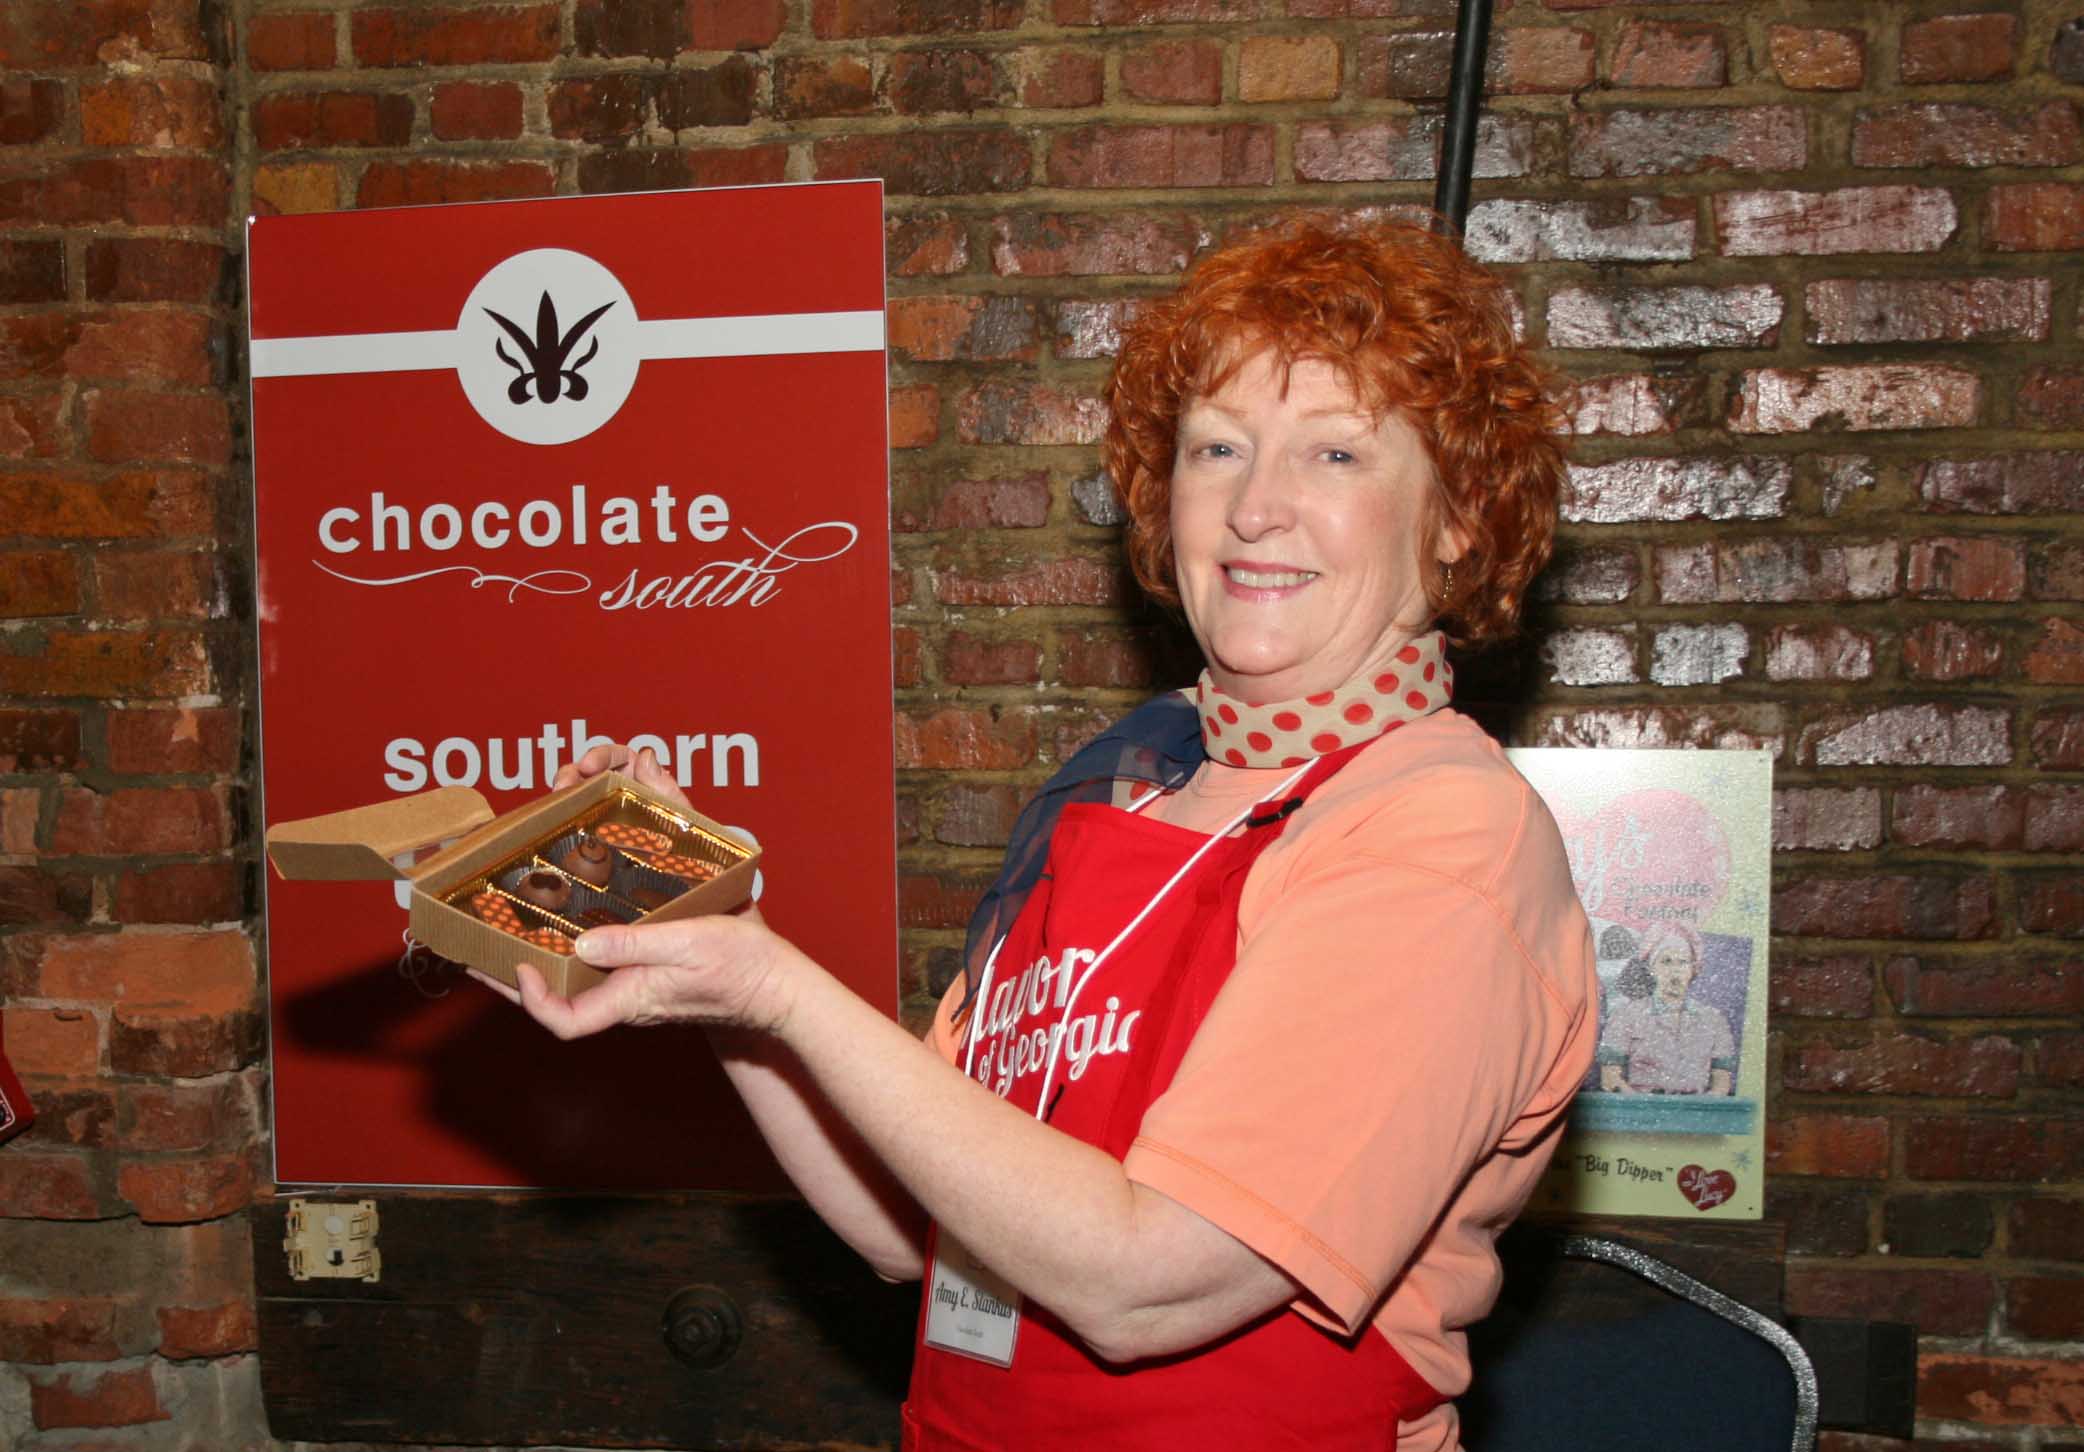 Atlanta architect and chocolatier Amy Stankus serves chocolates to the public during the Flavor of Georgia 2013 legislative reception on Monday March 11 at the Georgia Freight Depot in Atlanta. Stankus' company Chocolate South won the first prize in the 2013 Flavor of Georgia Food Product Contest.